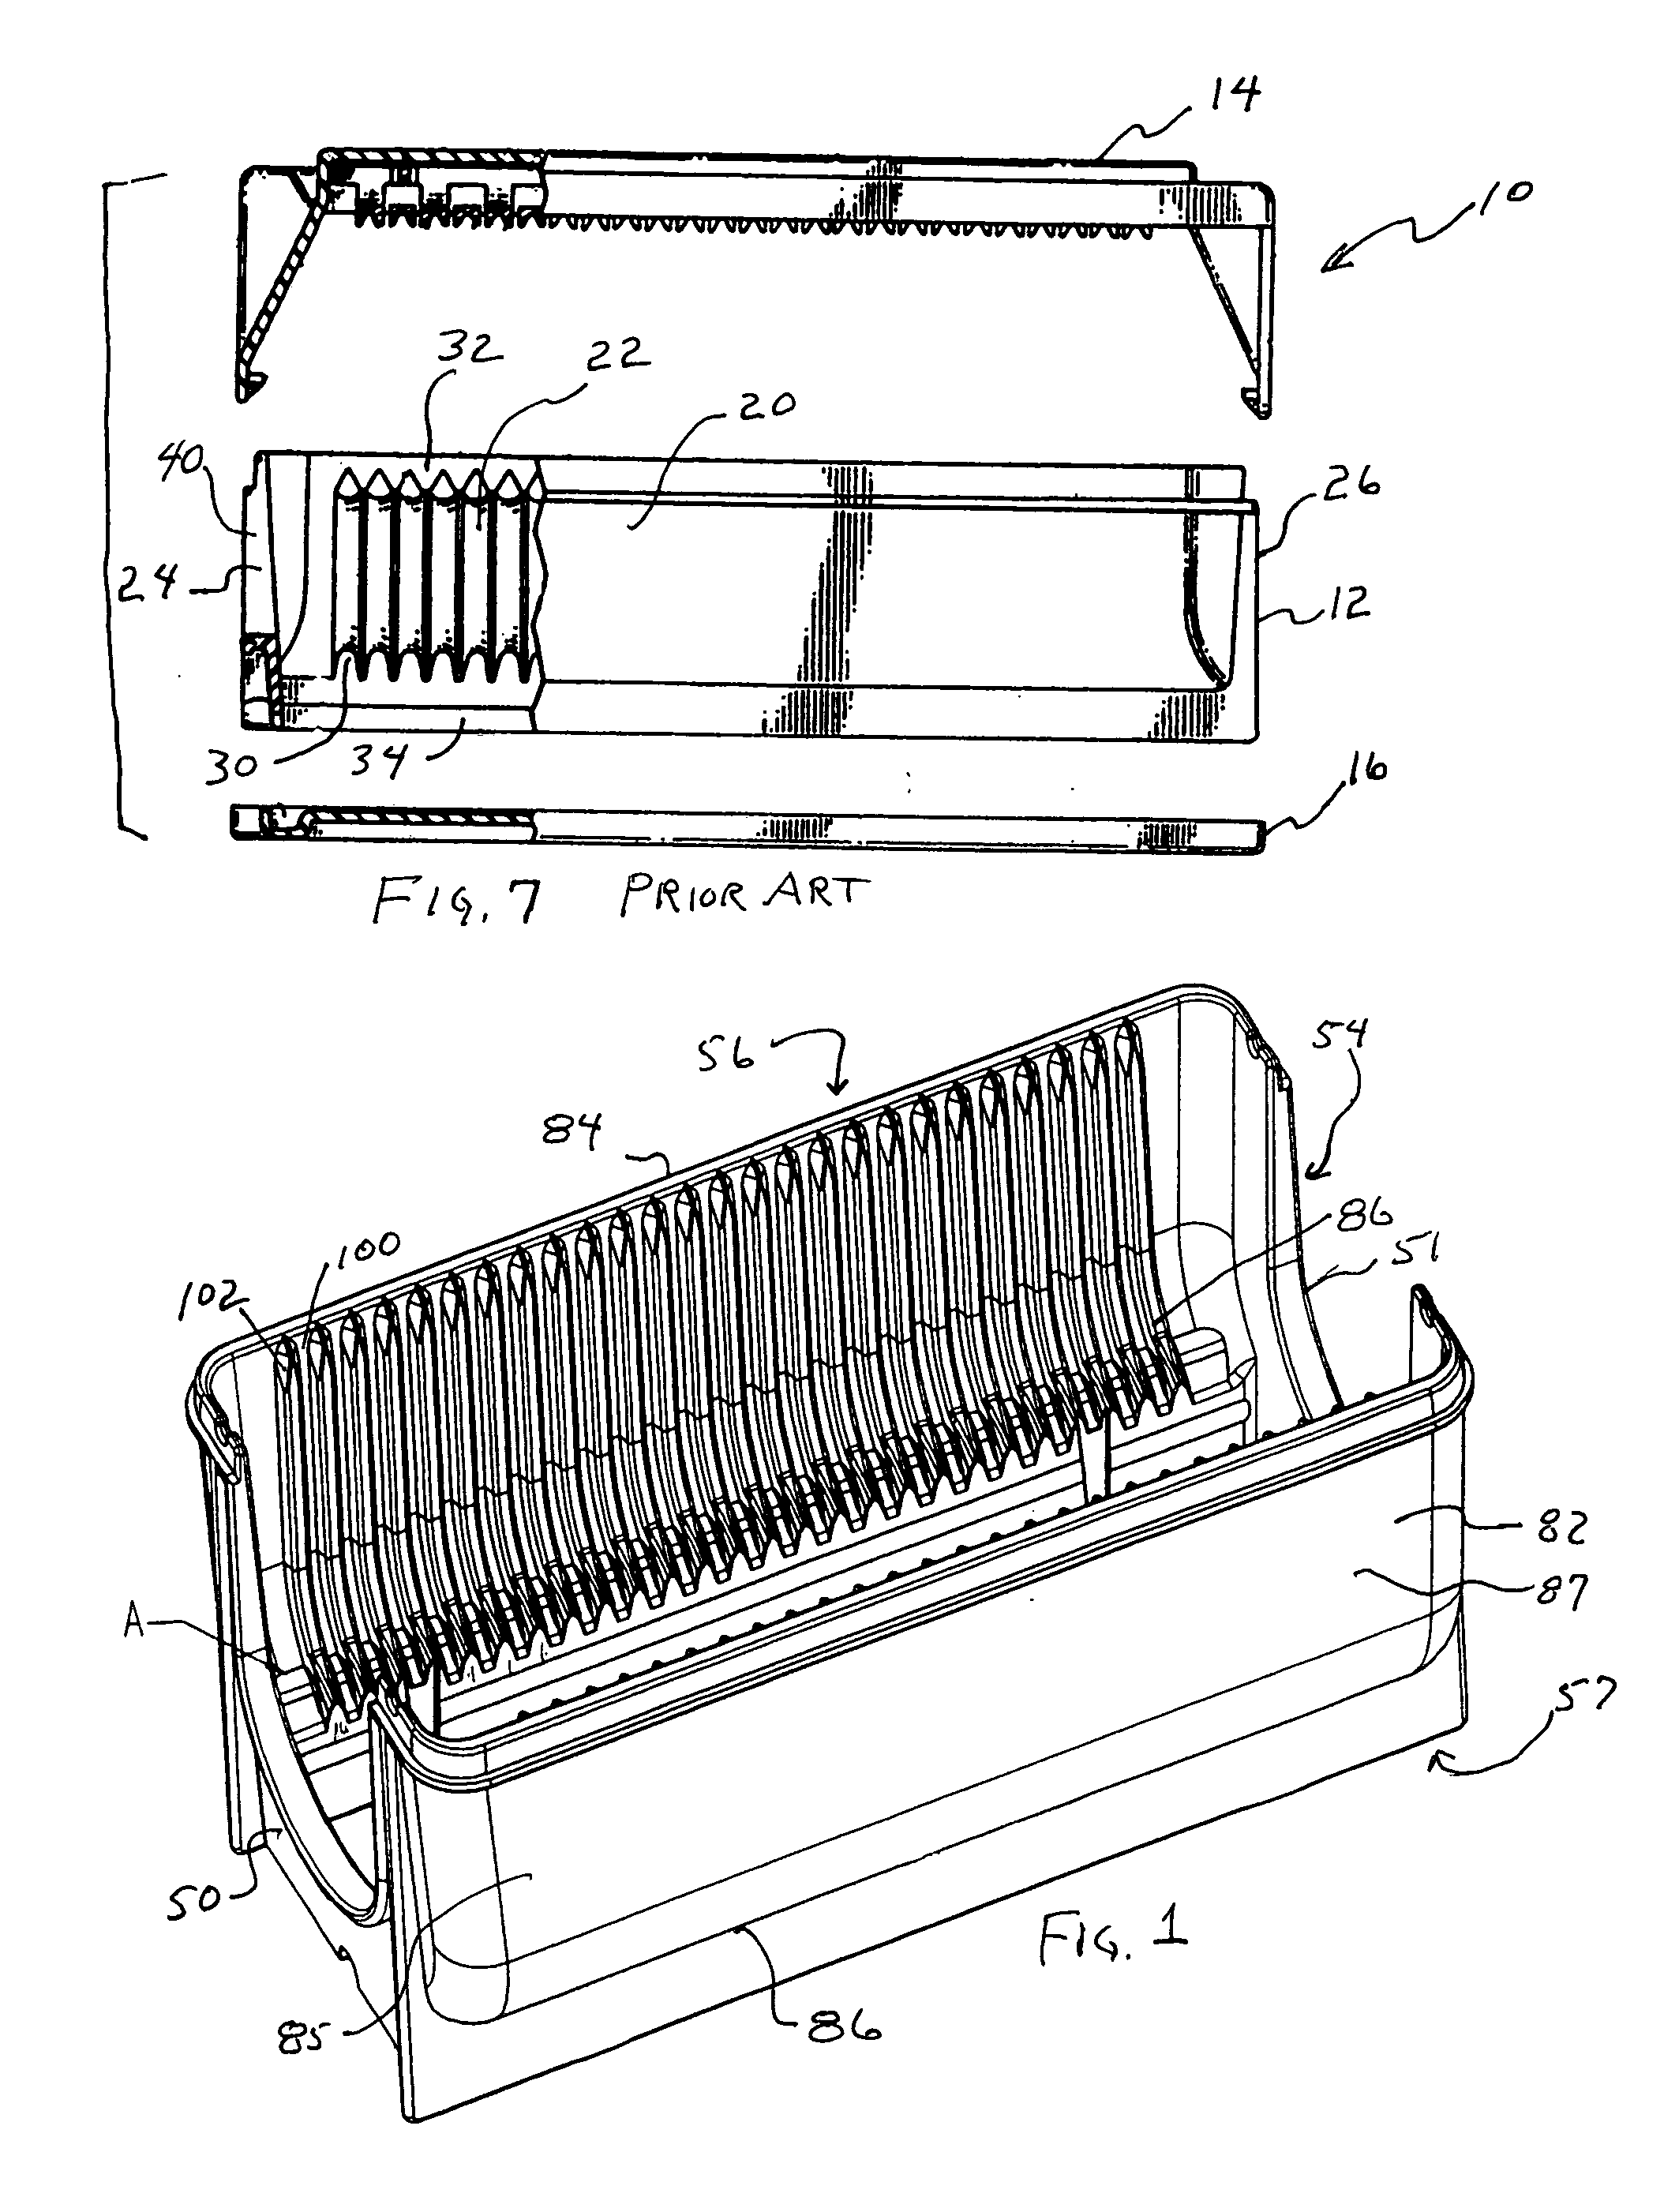 Shipper with tooth design for improved loading